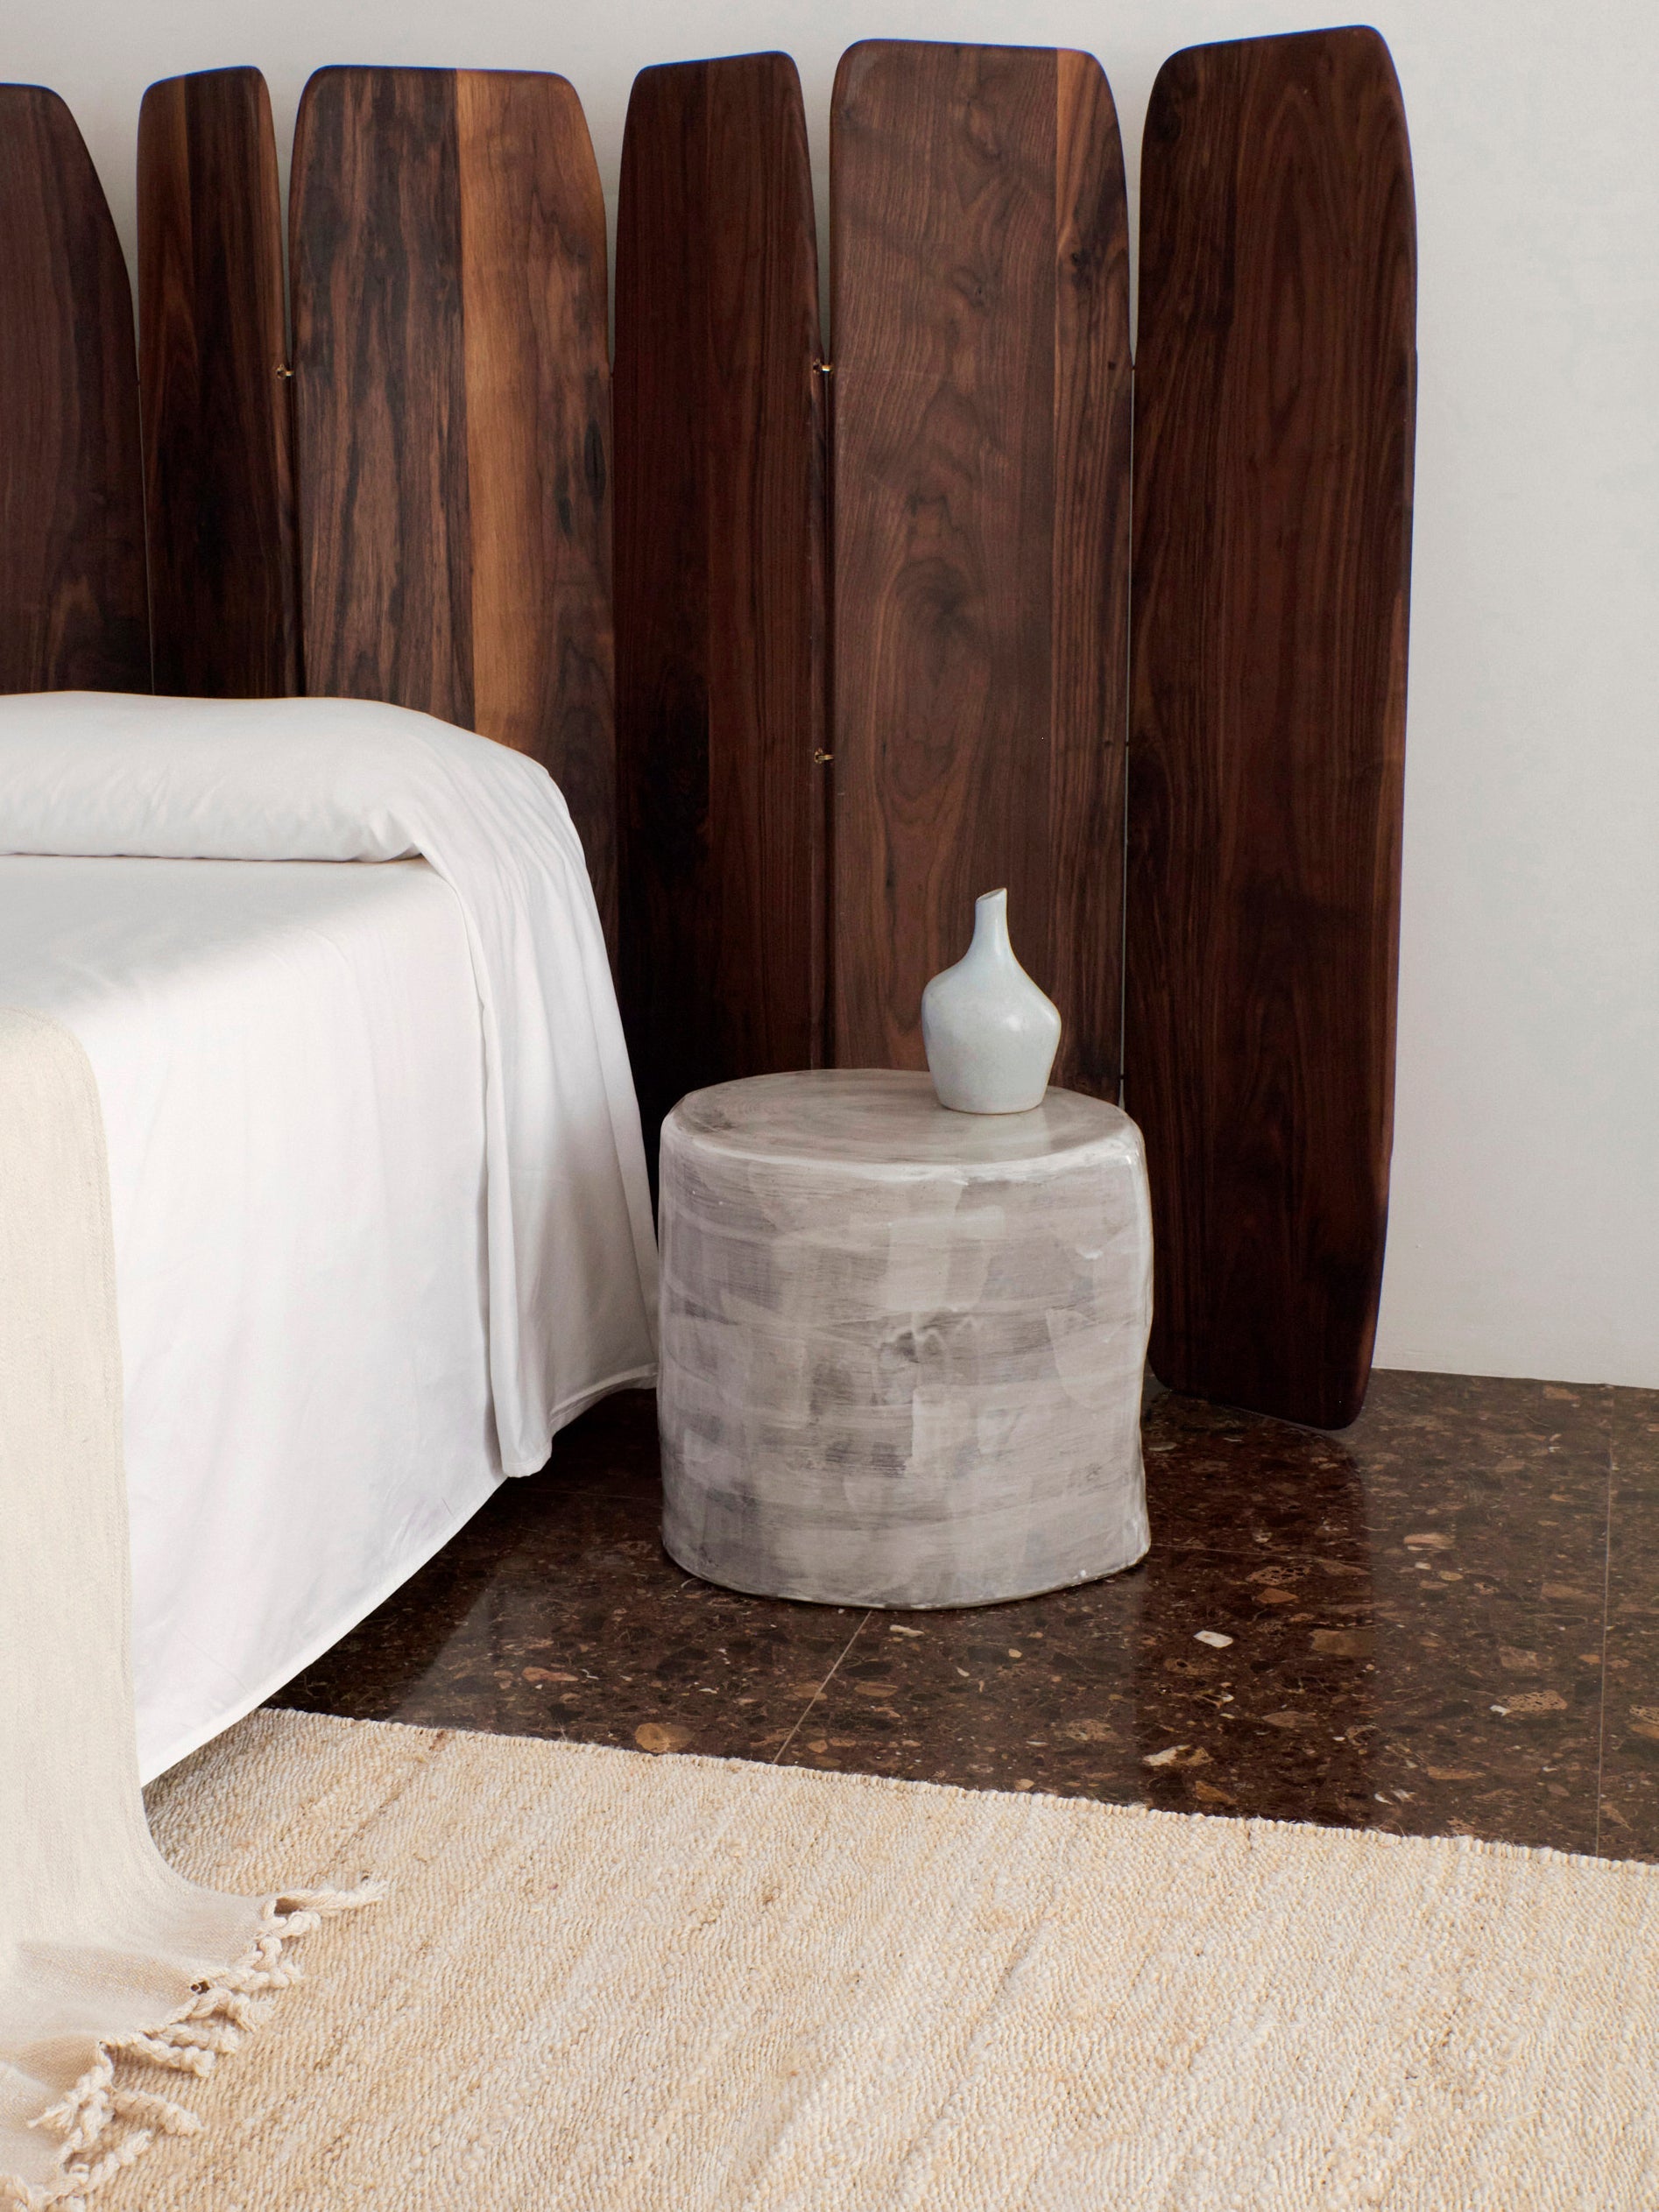 Ceramic Side Table - Small (Custom Shape) in Brushed White End Tables